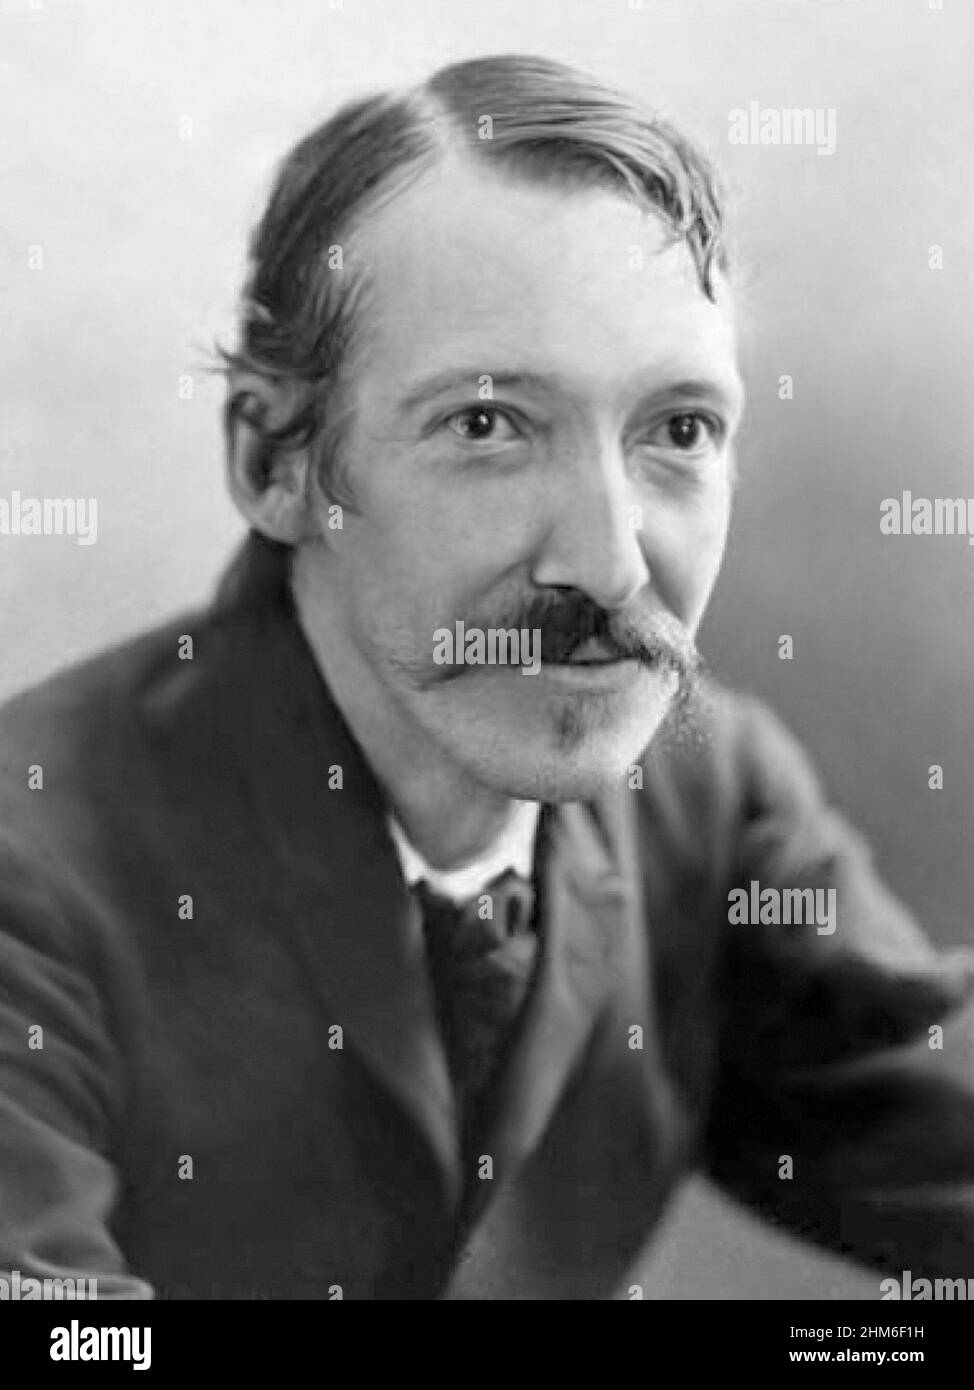 A portrait of the Scottish writer Robert Louis Stevenson, author of Treasure Island and The Black Arrow, from 1893. He is 43 yrs old. Stock Photo